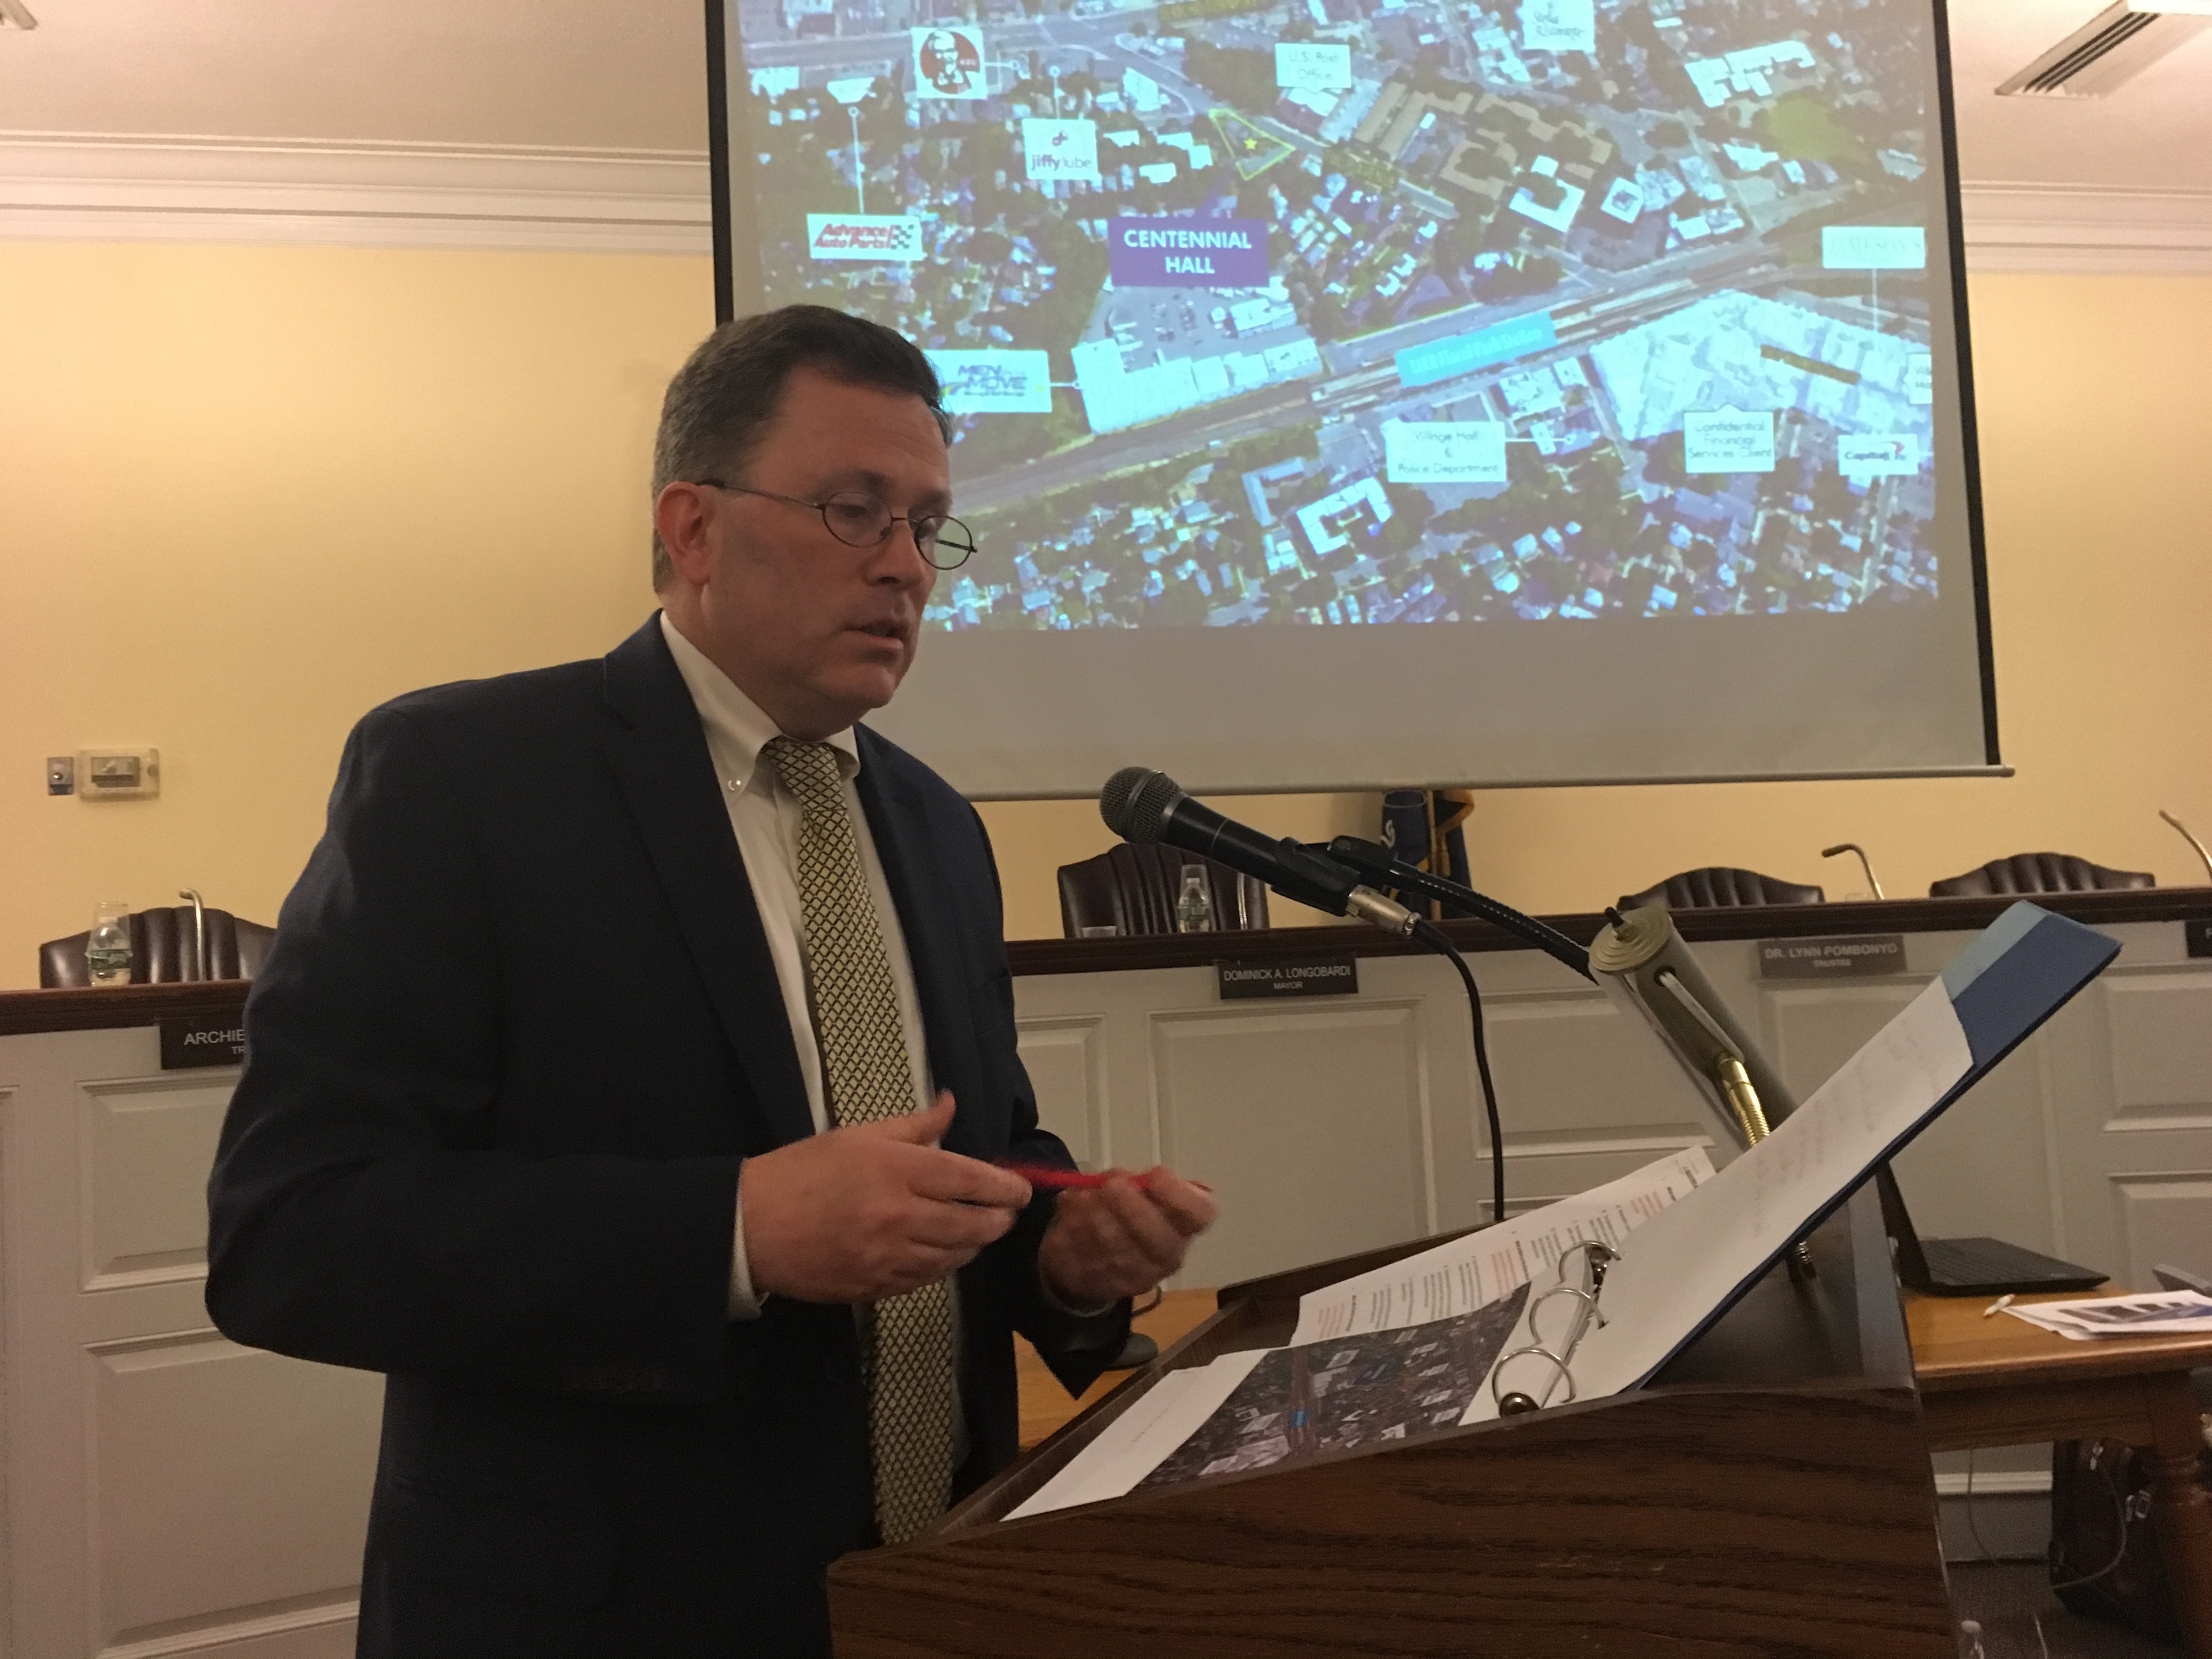 Floral Park weighs plans for historic Centennial Hall